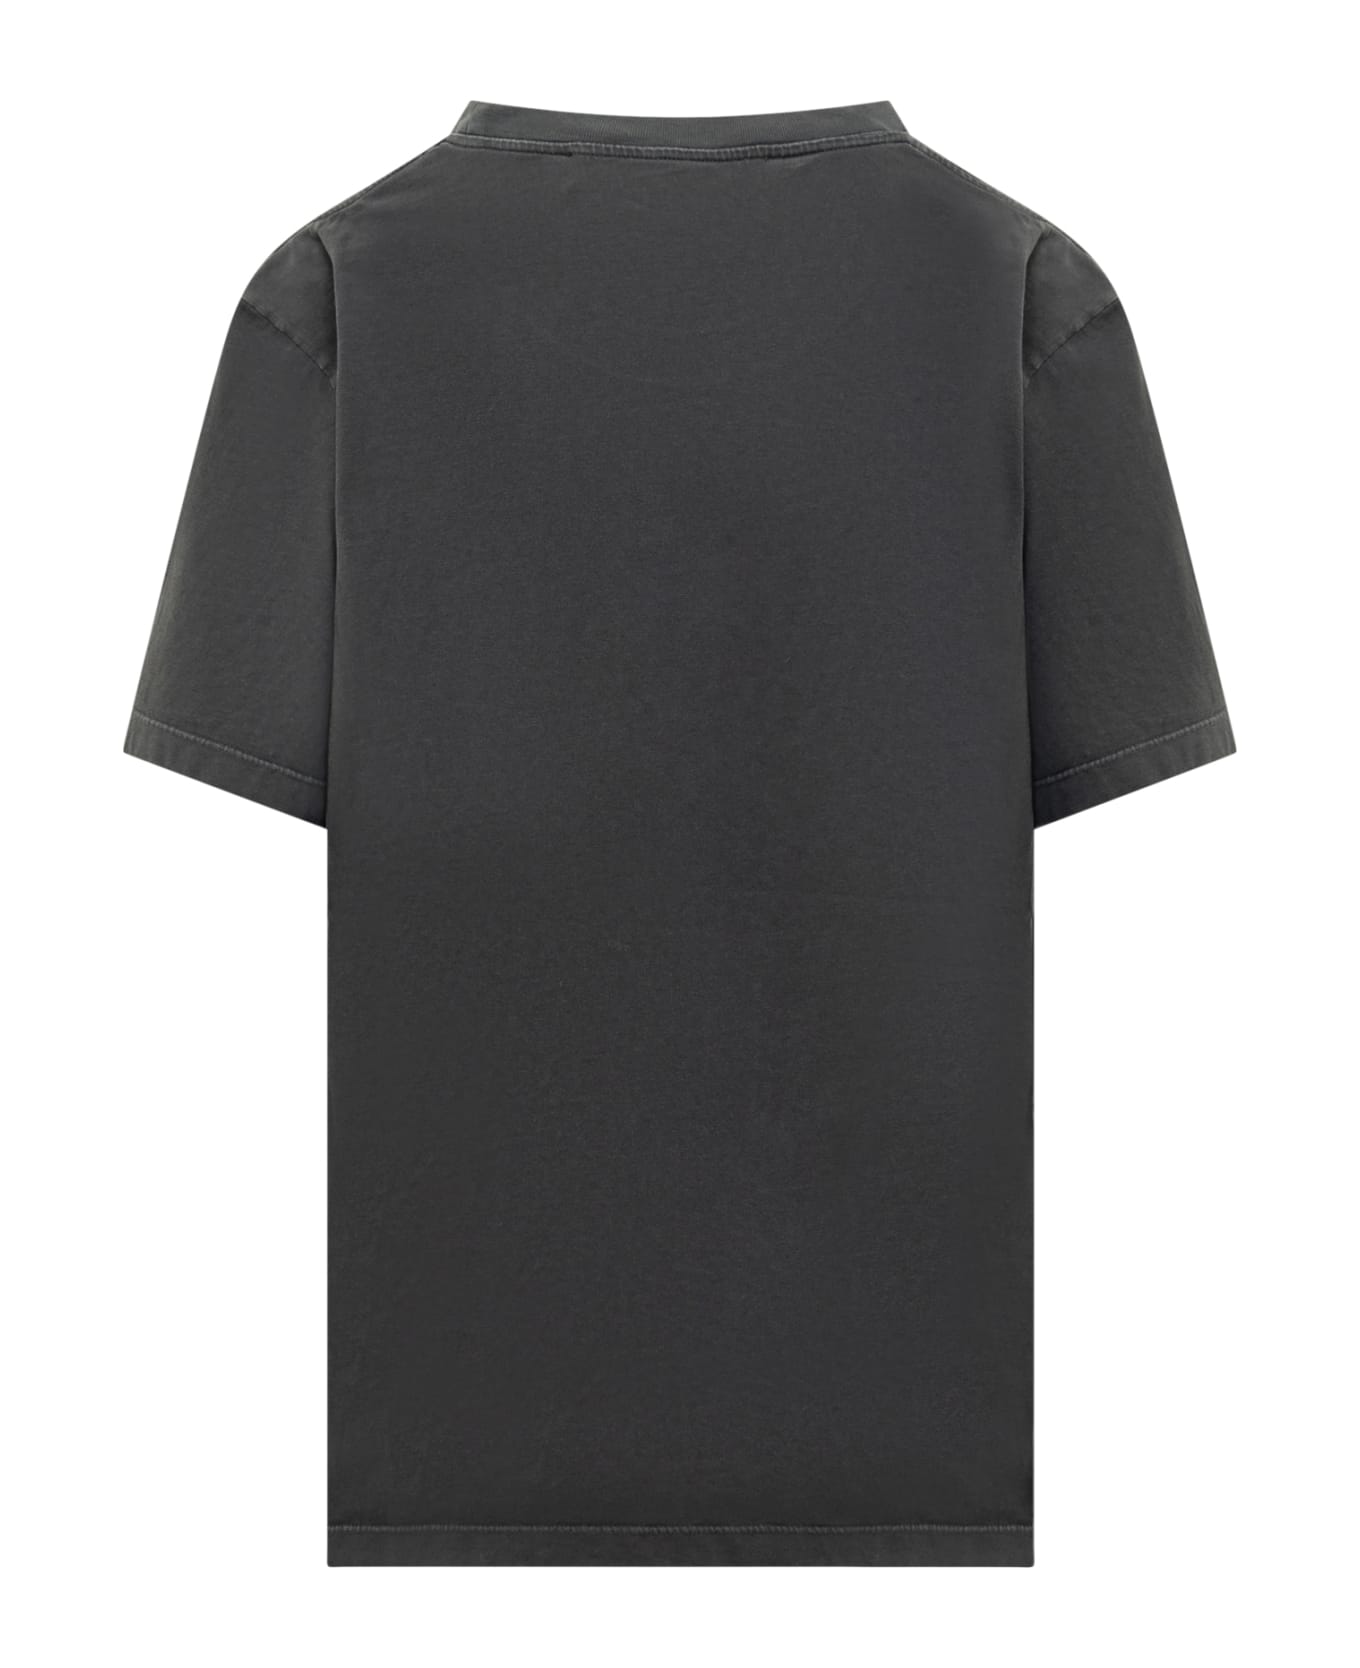 Stella McCartney T-shirt With Graphic Wing Print - BLACK Tシャツ